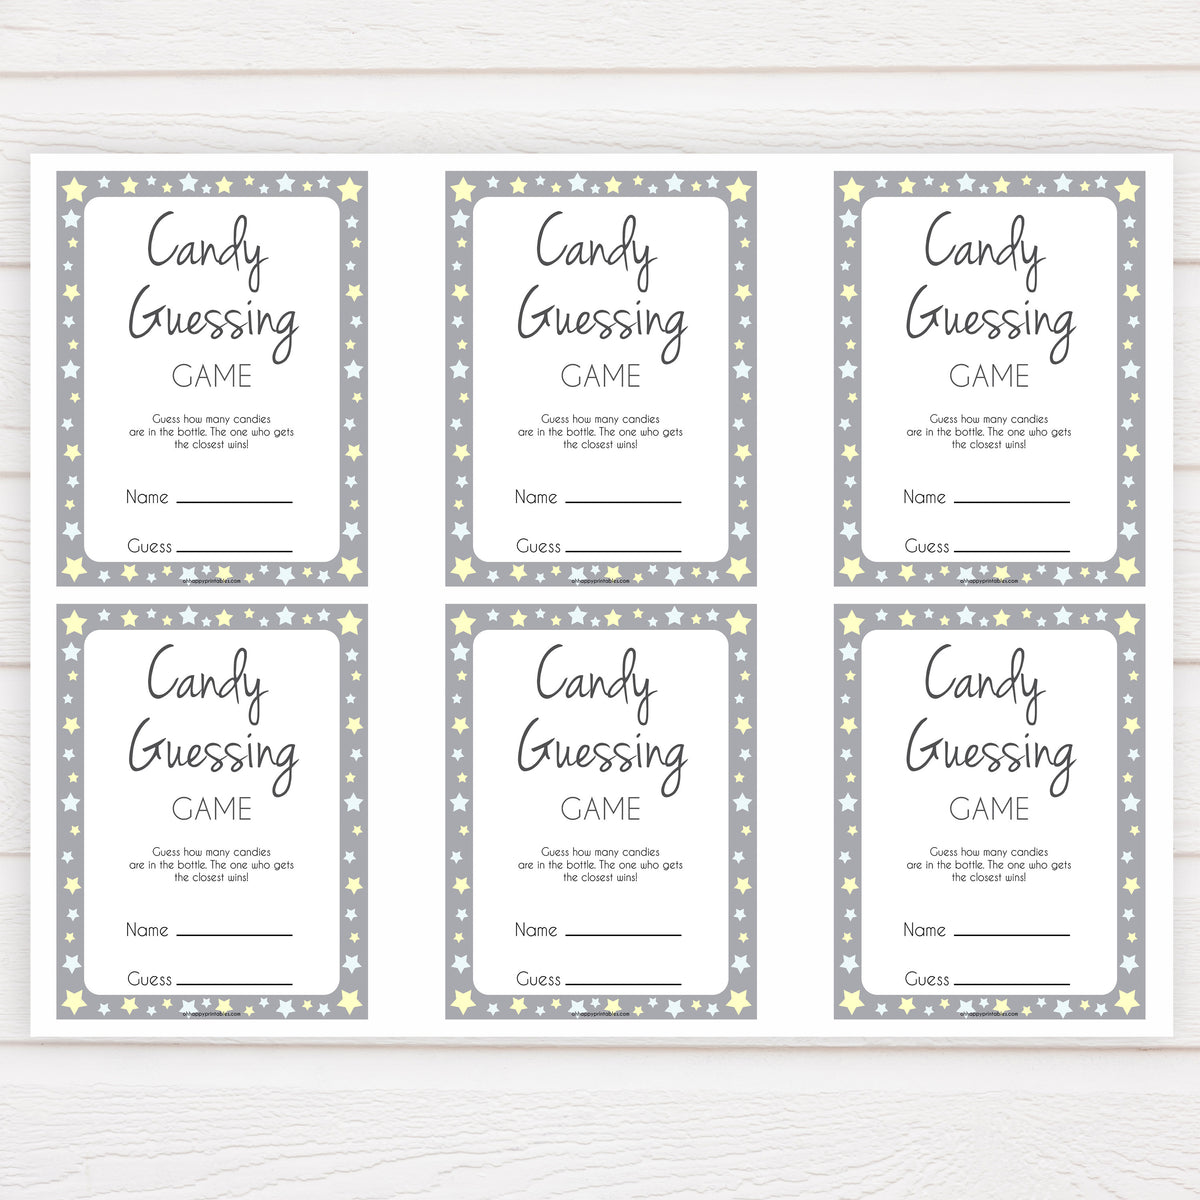 Candy Guessing Game Free Printable Printable Templates